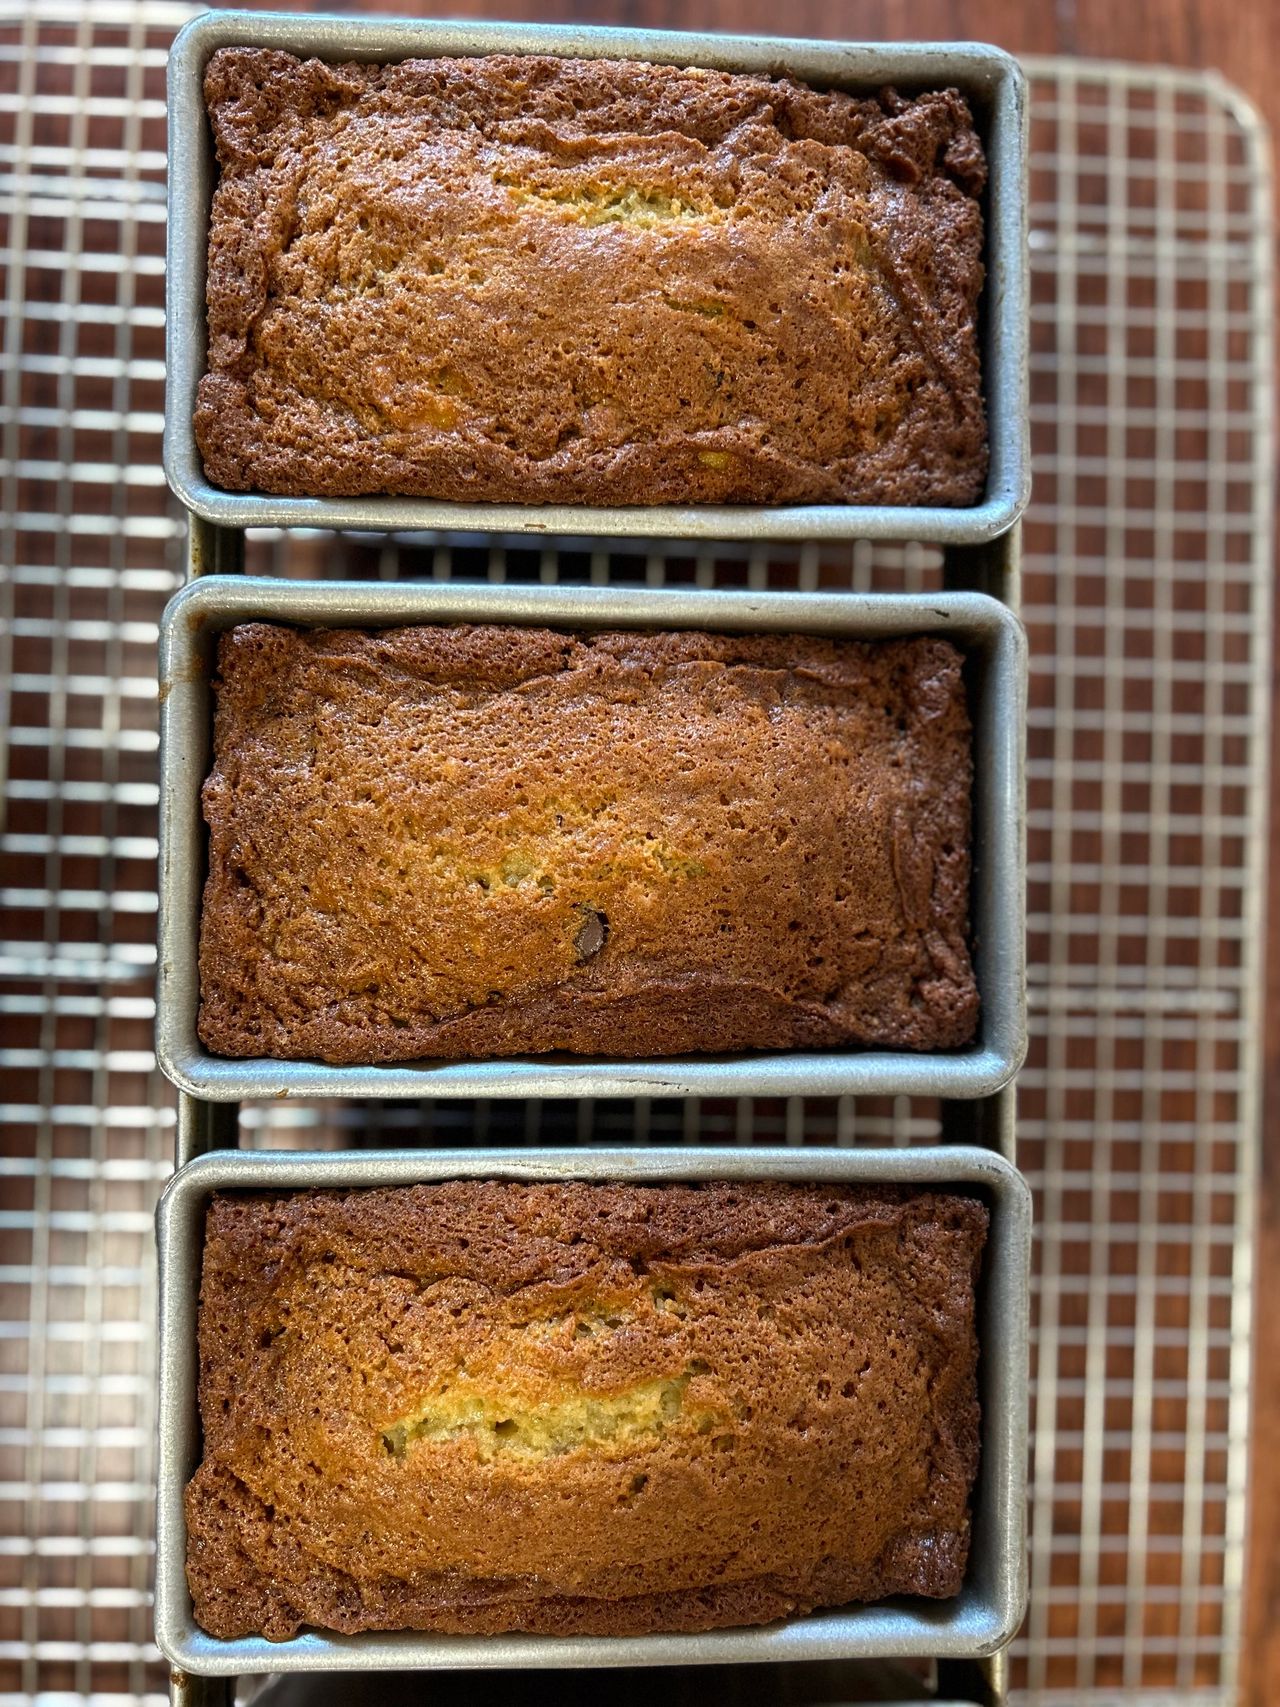 Old-fashioned Banana Chocolate Chip Bread has the most wonderful texture - a lightly crunchy crust and an ooey-gooey center.